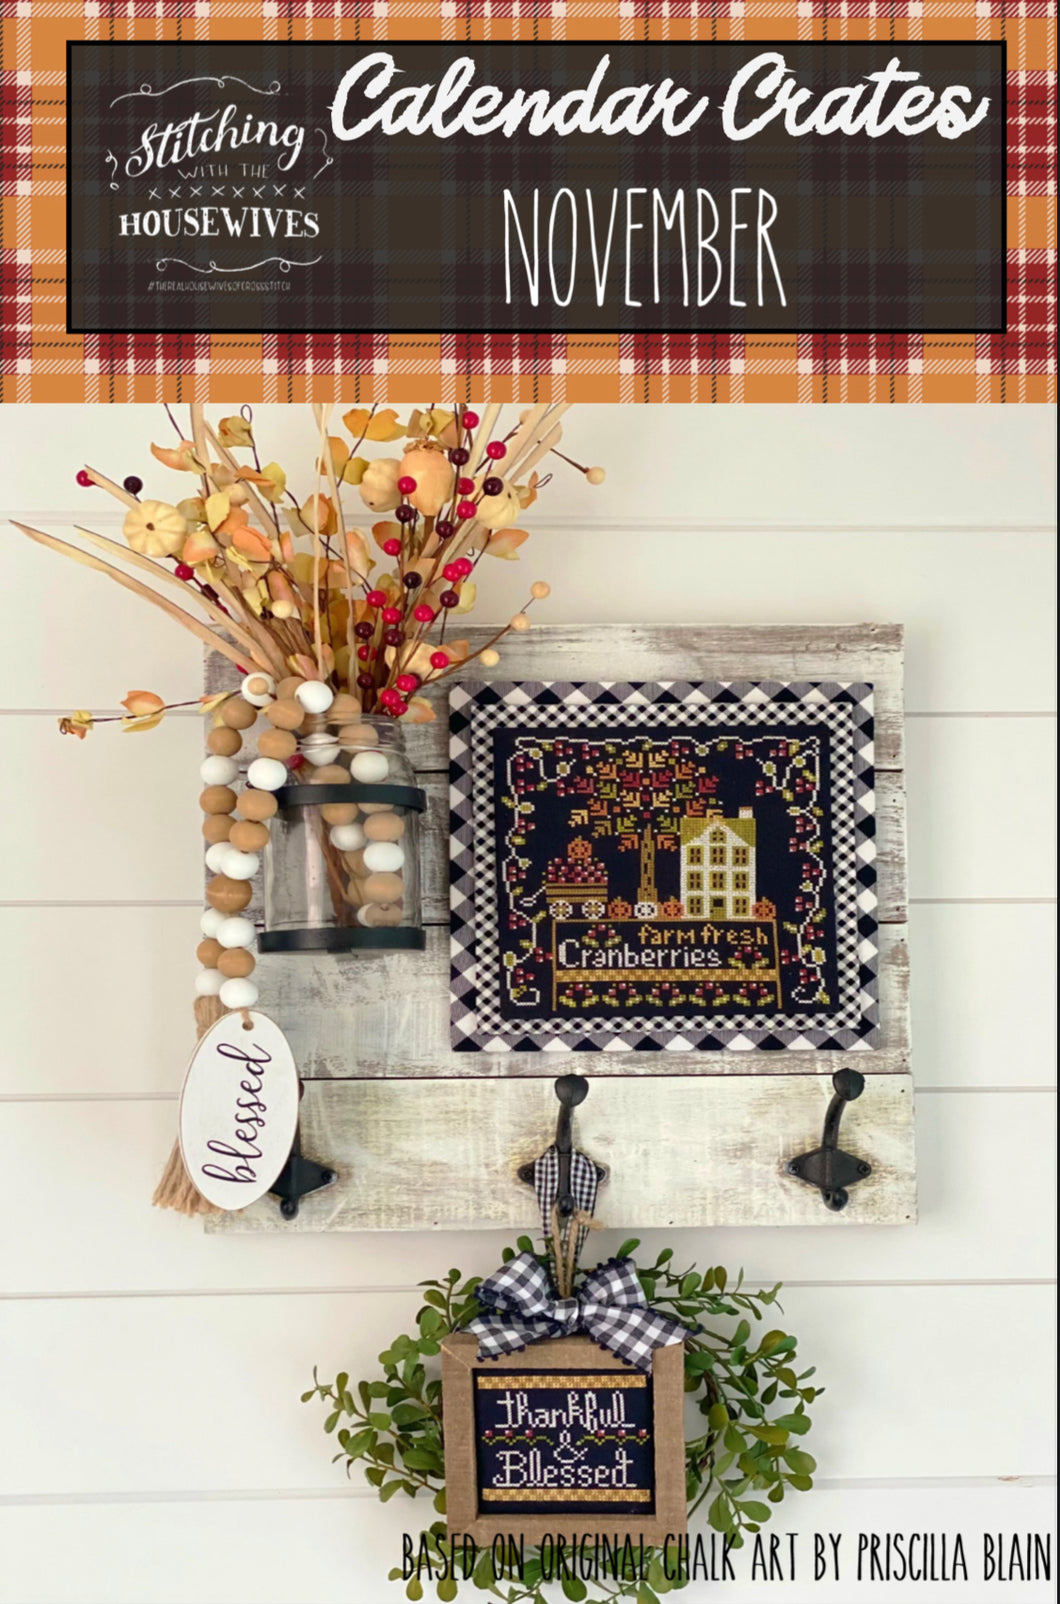 Calendar Crates - November by Stitching with the Housewives